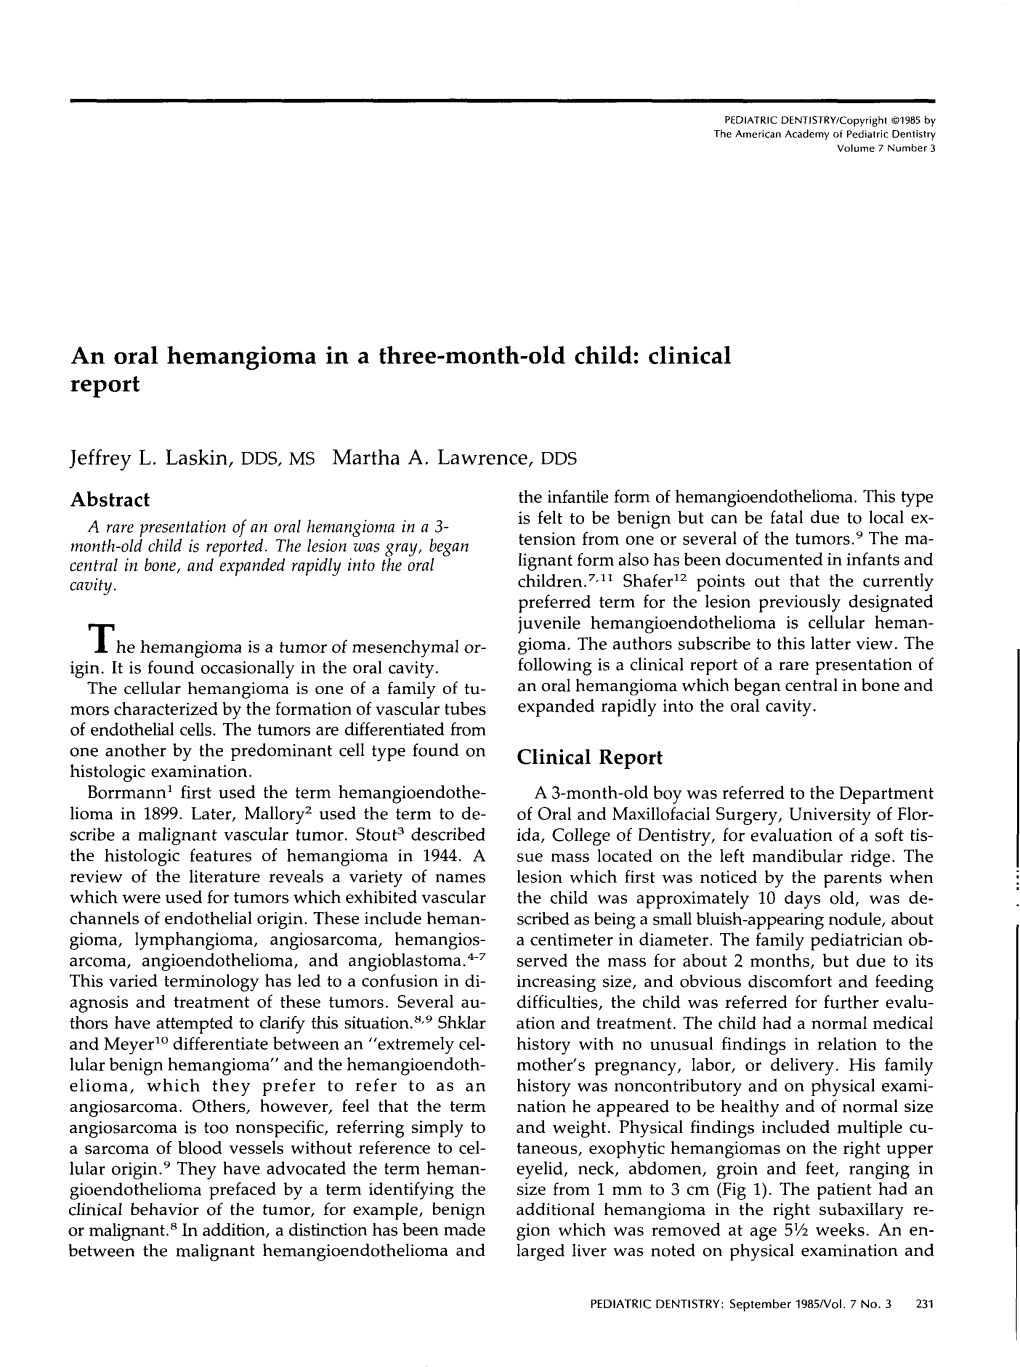 An Oral Hemangioma in a Three-Month-Old Child: Clinical Report